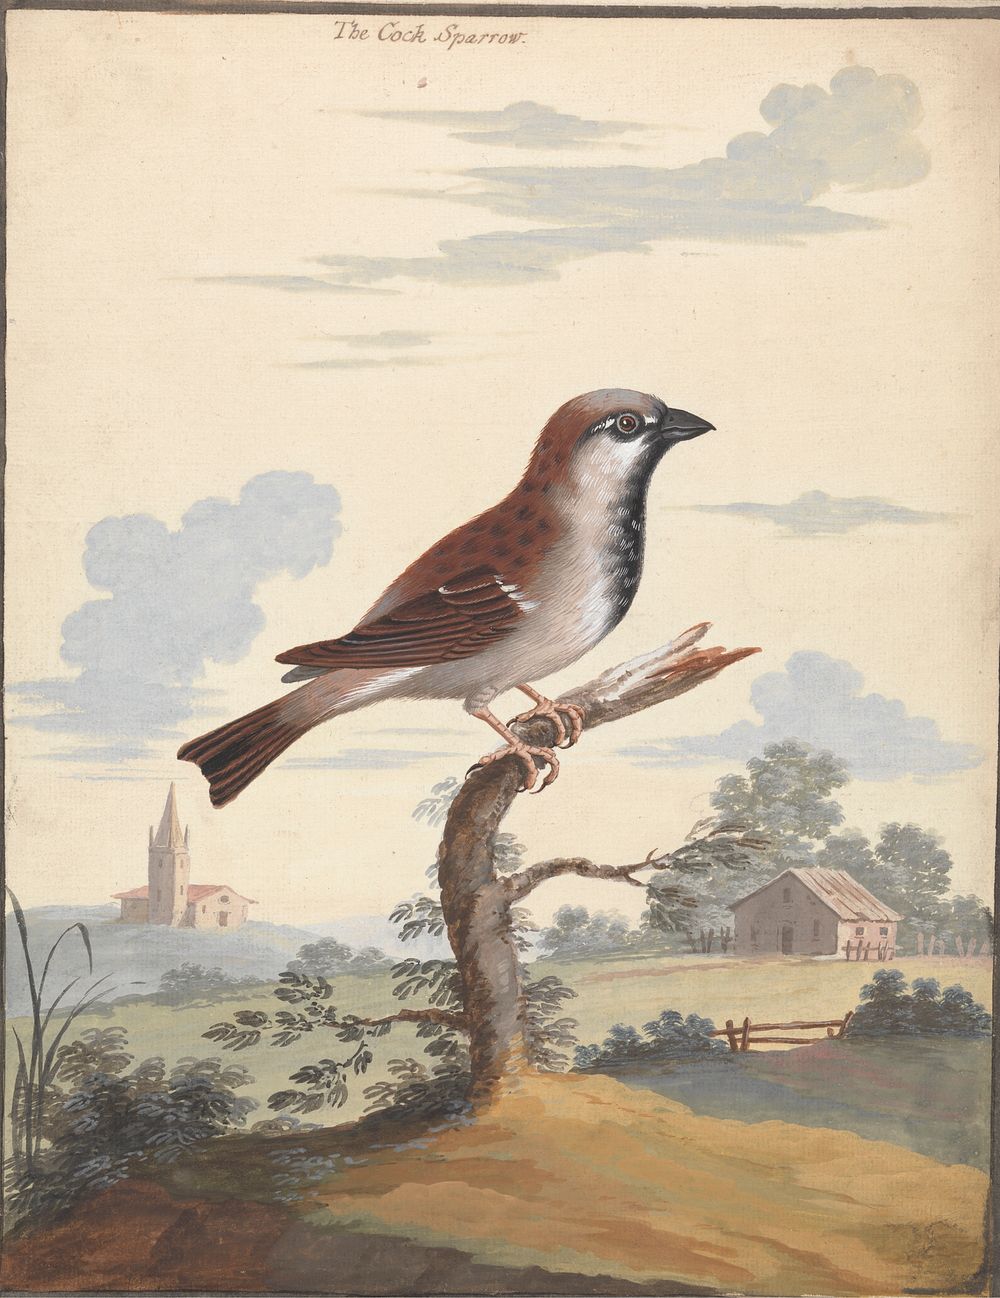 The Cock Sparrow by George Edwards